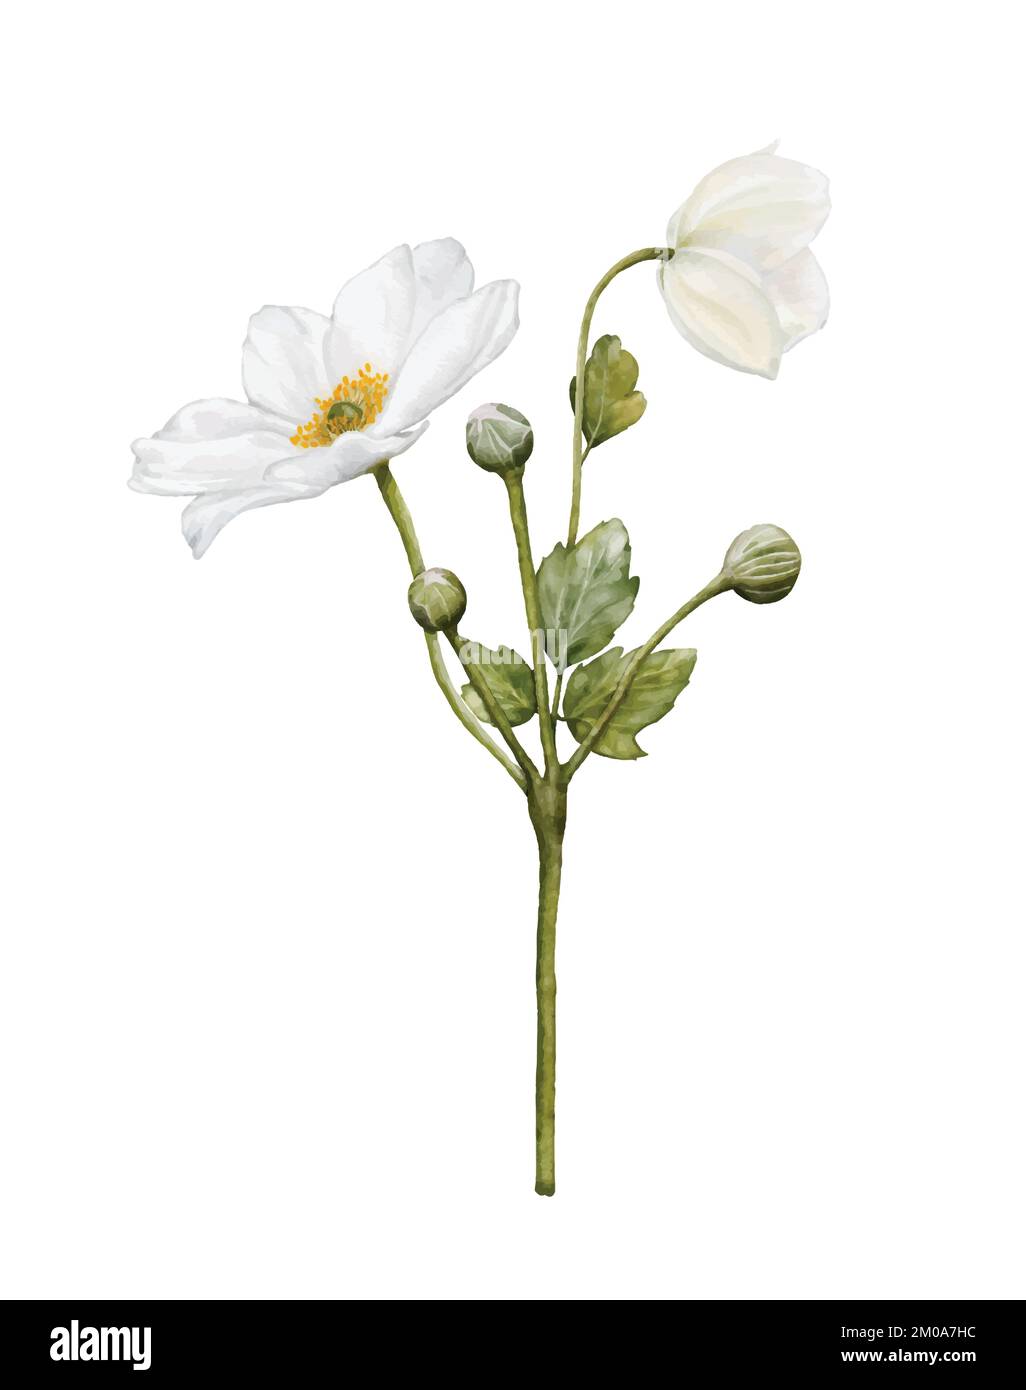 Watercolor white flower blooming. Anemones bouquet illustration isolated on white background. Suitable for decorative winter festivals, spring, weddin Stock Vector